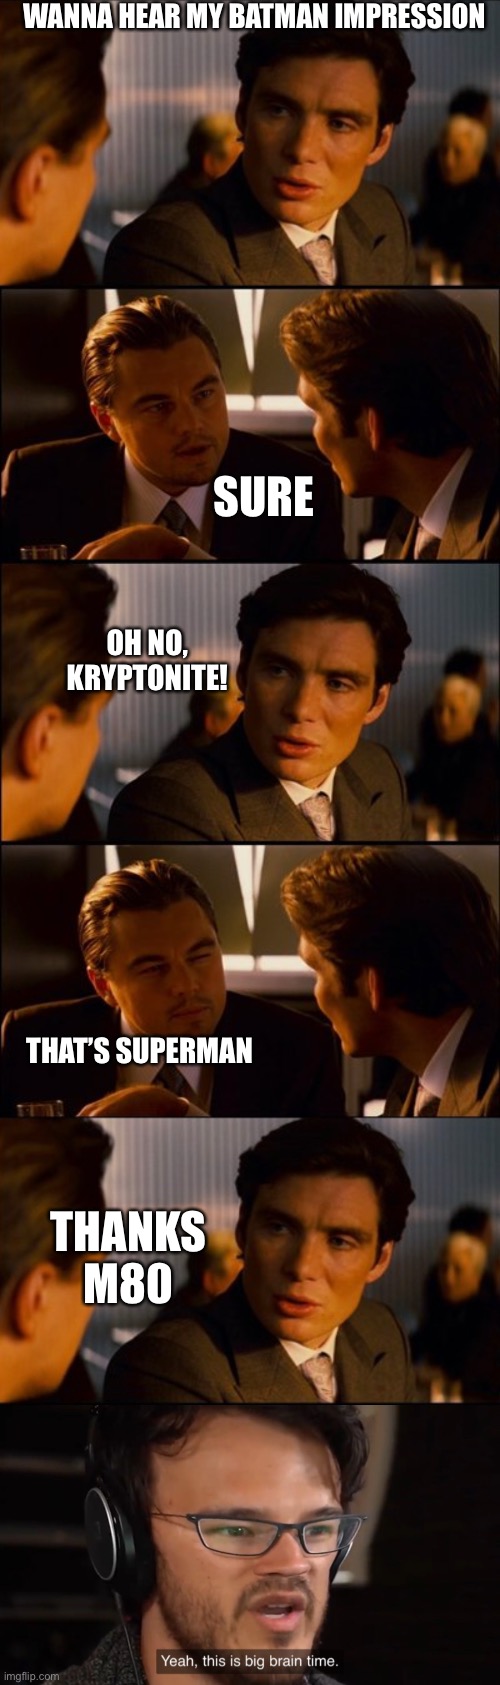 WANNA HEAR MY BATMAN IMPRESSION; SURE; OH NO, KRYPTONITE! THAT’S SUPERMAN; THANKS M80 | image tagged in conversation,yeah this is big brain time | made w/ Imgflip meme maker